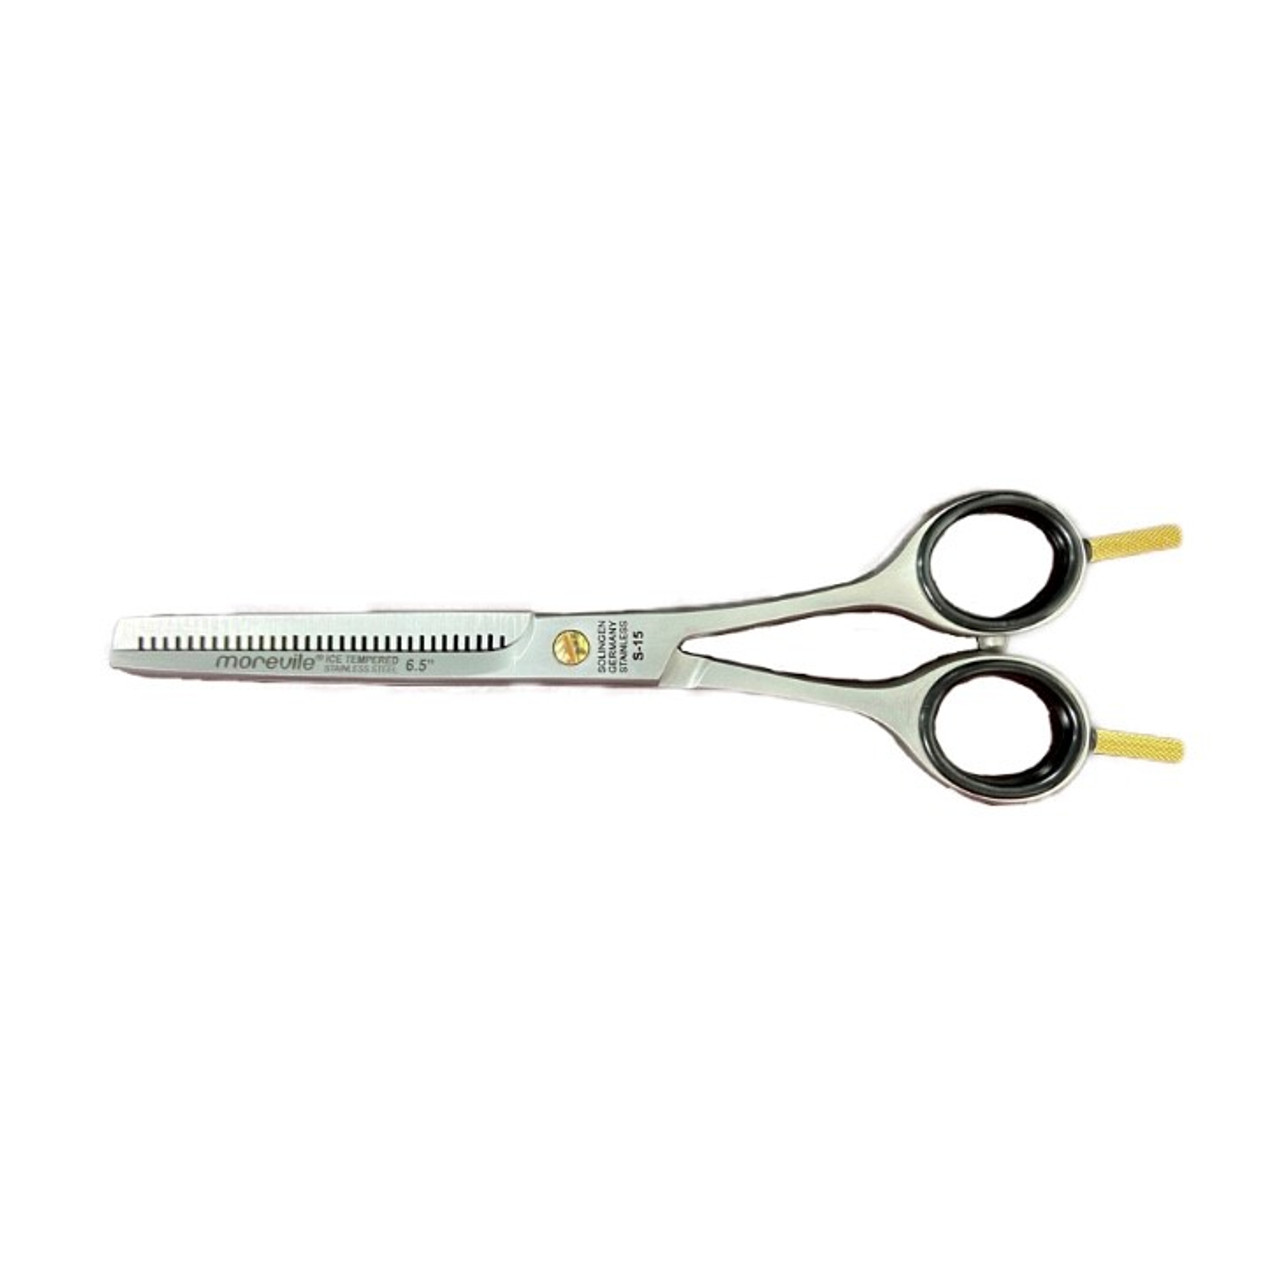 Haircut & Thinning Scissors Set HAIR KISS Made from Stainless